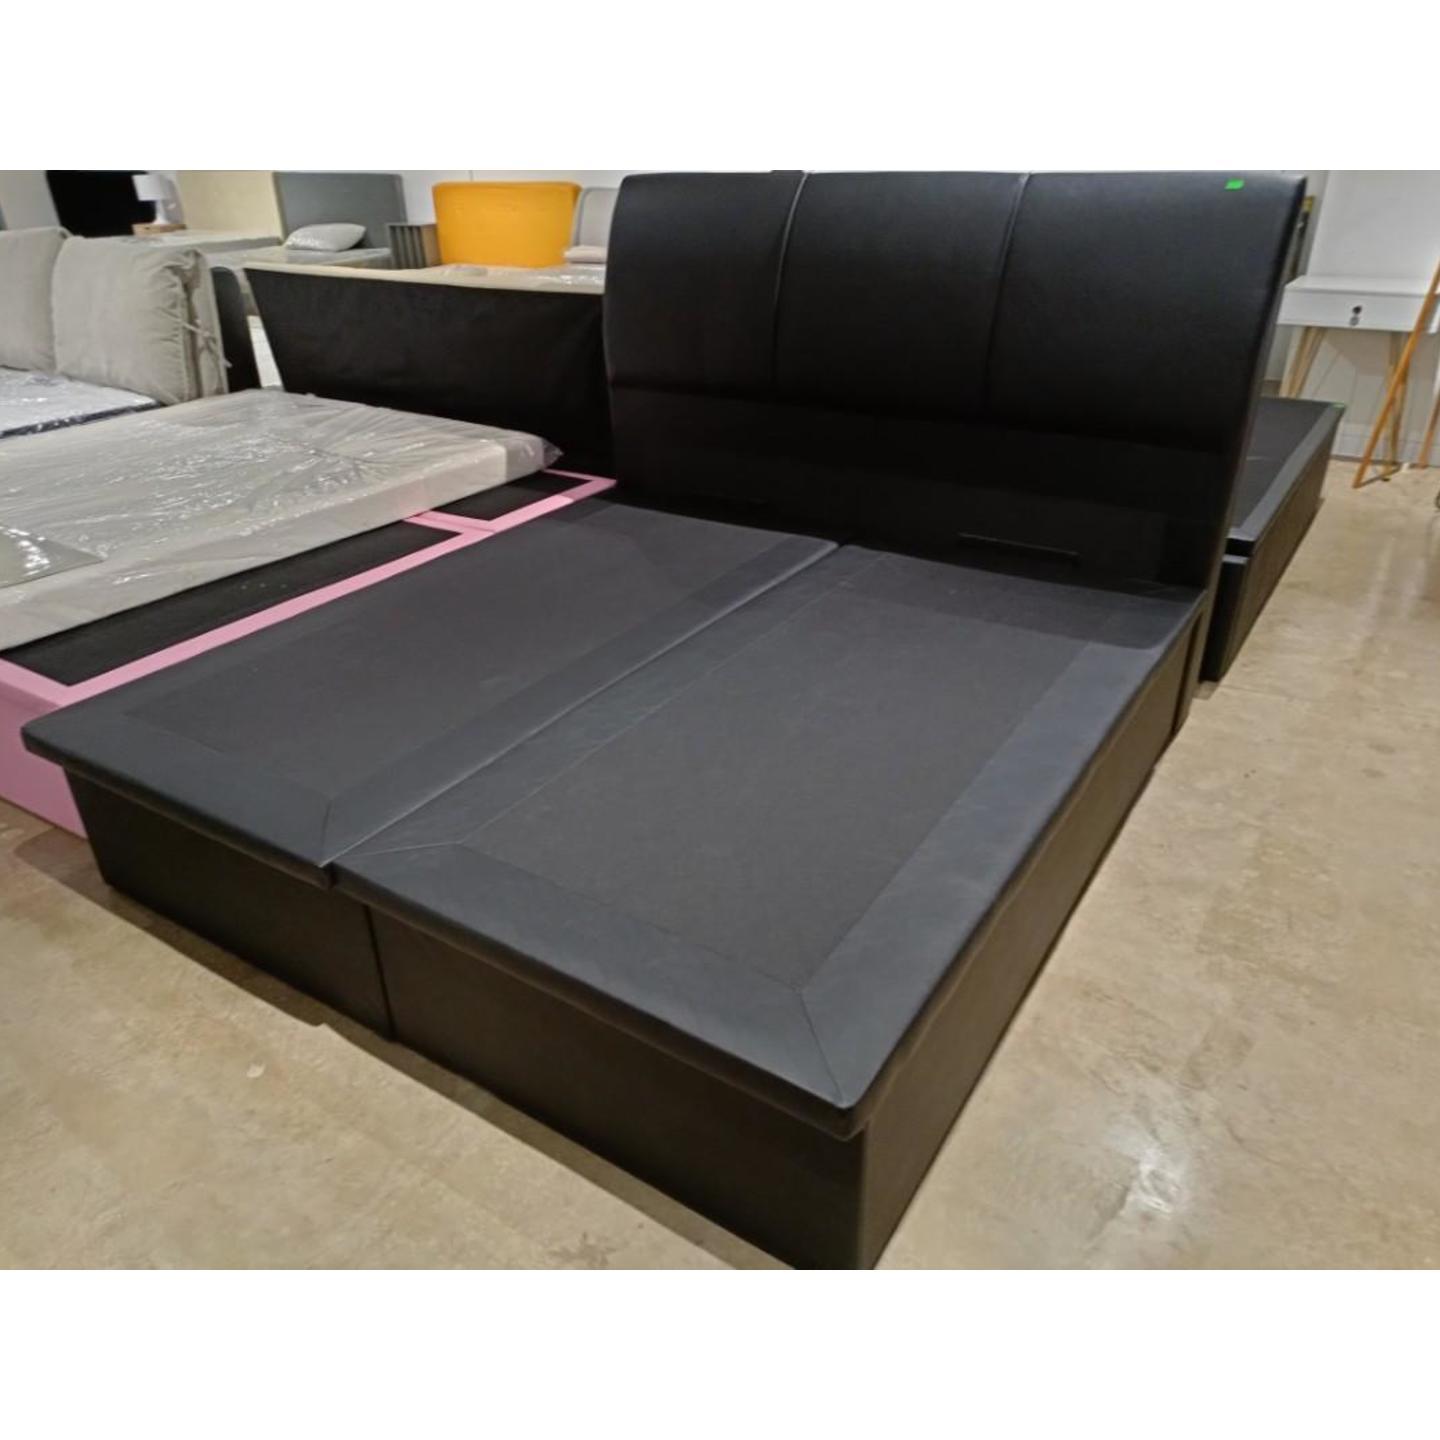 ESCOBAN KING Size Faux Leather Storage Bed in BLACK